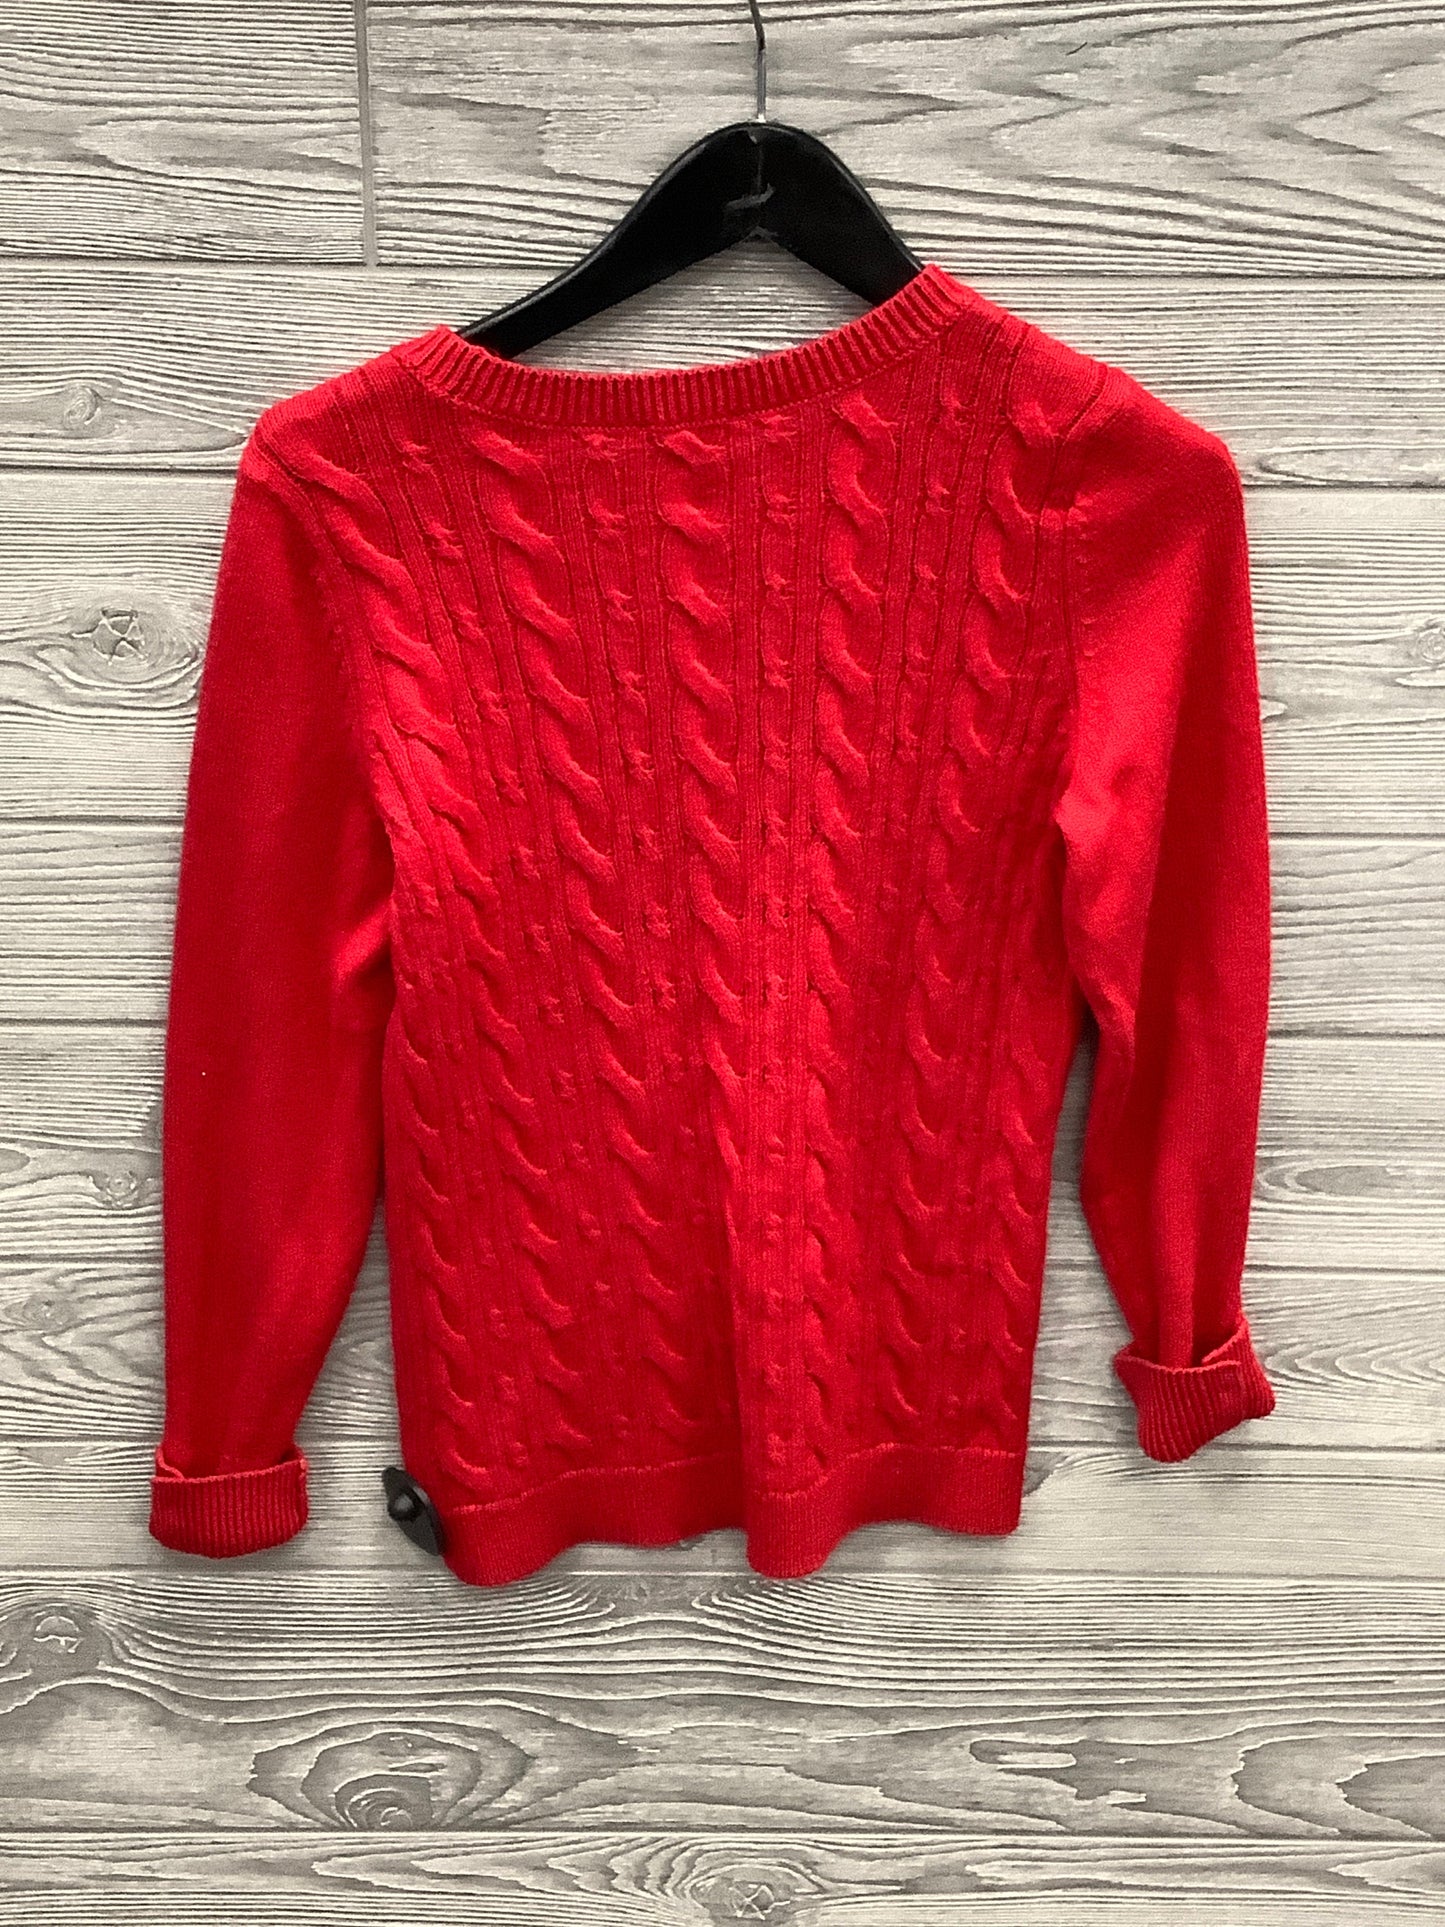 Sweater By Talbots  Size: S